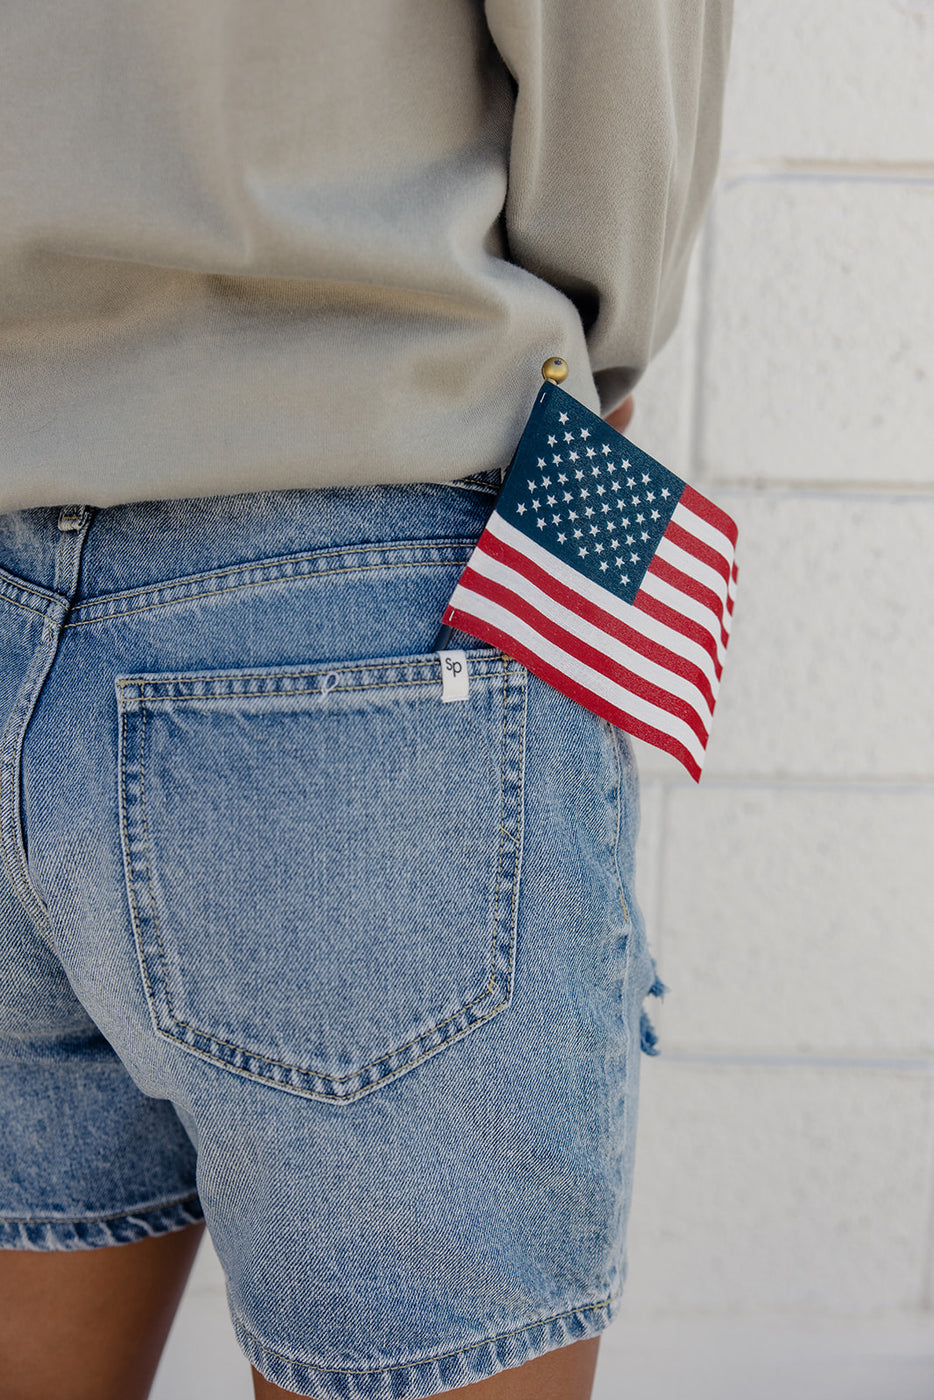 a person with a flag in their pocket